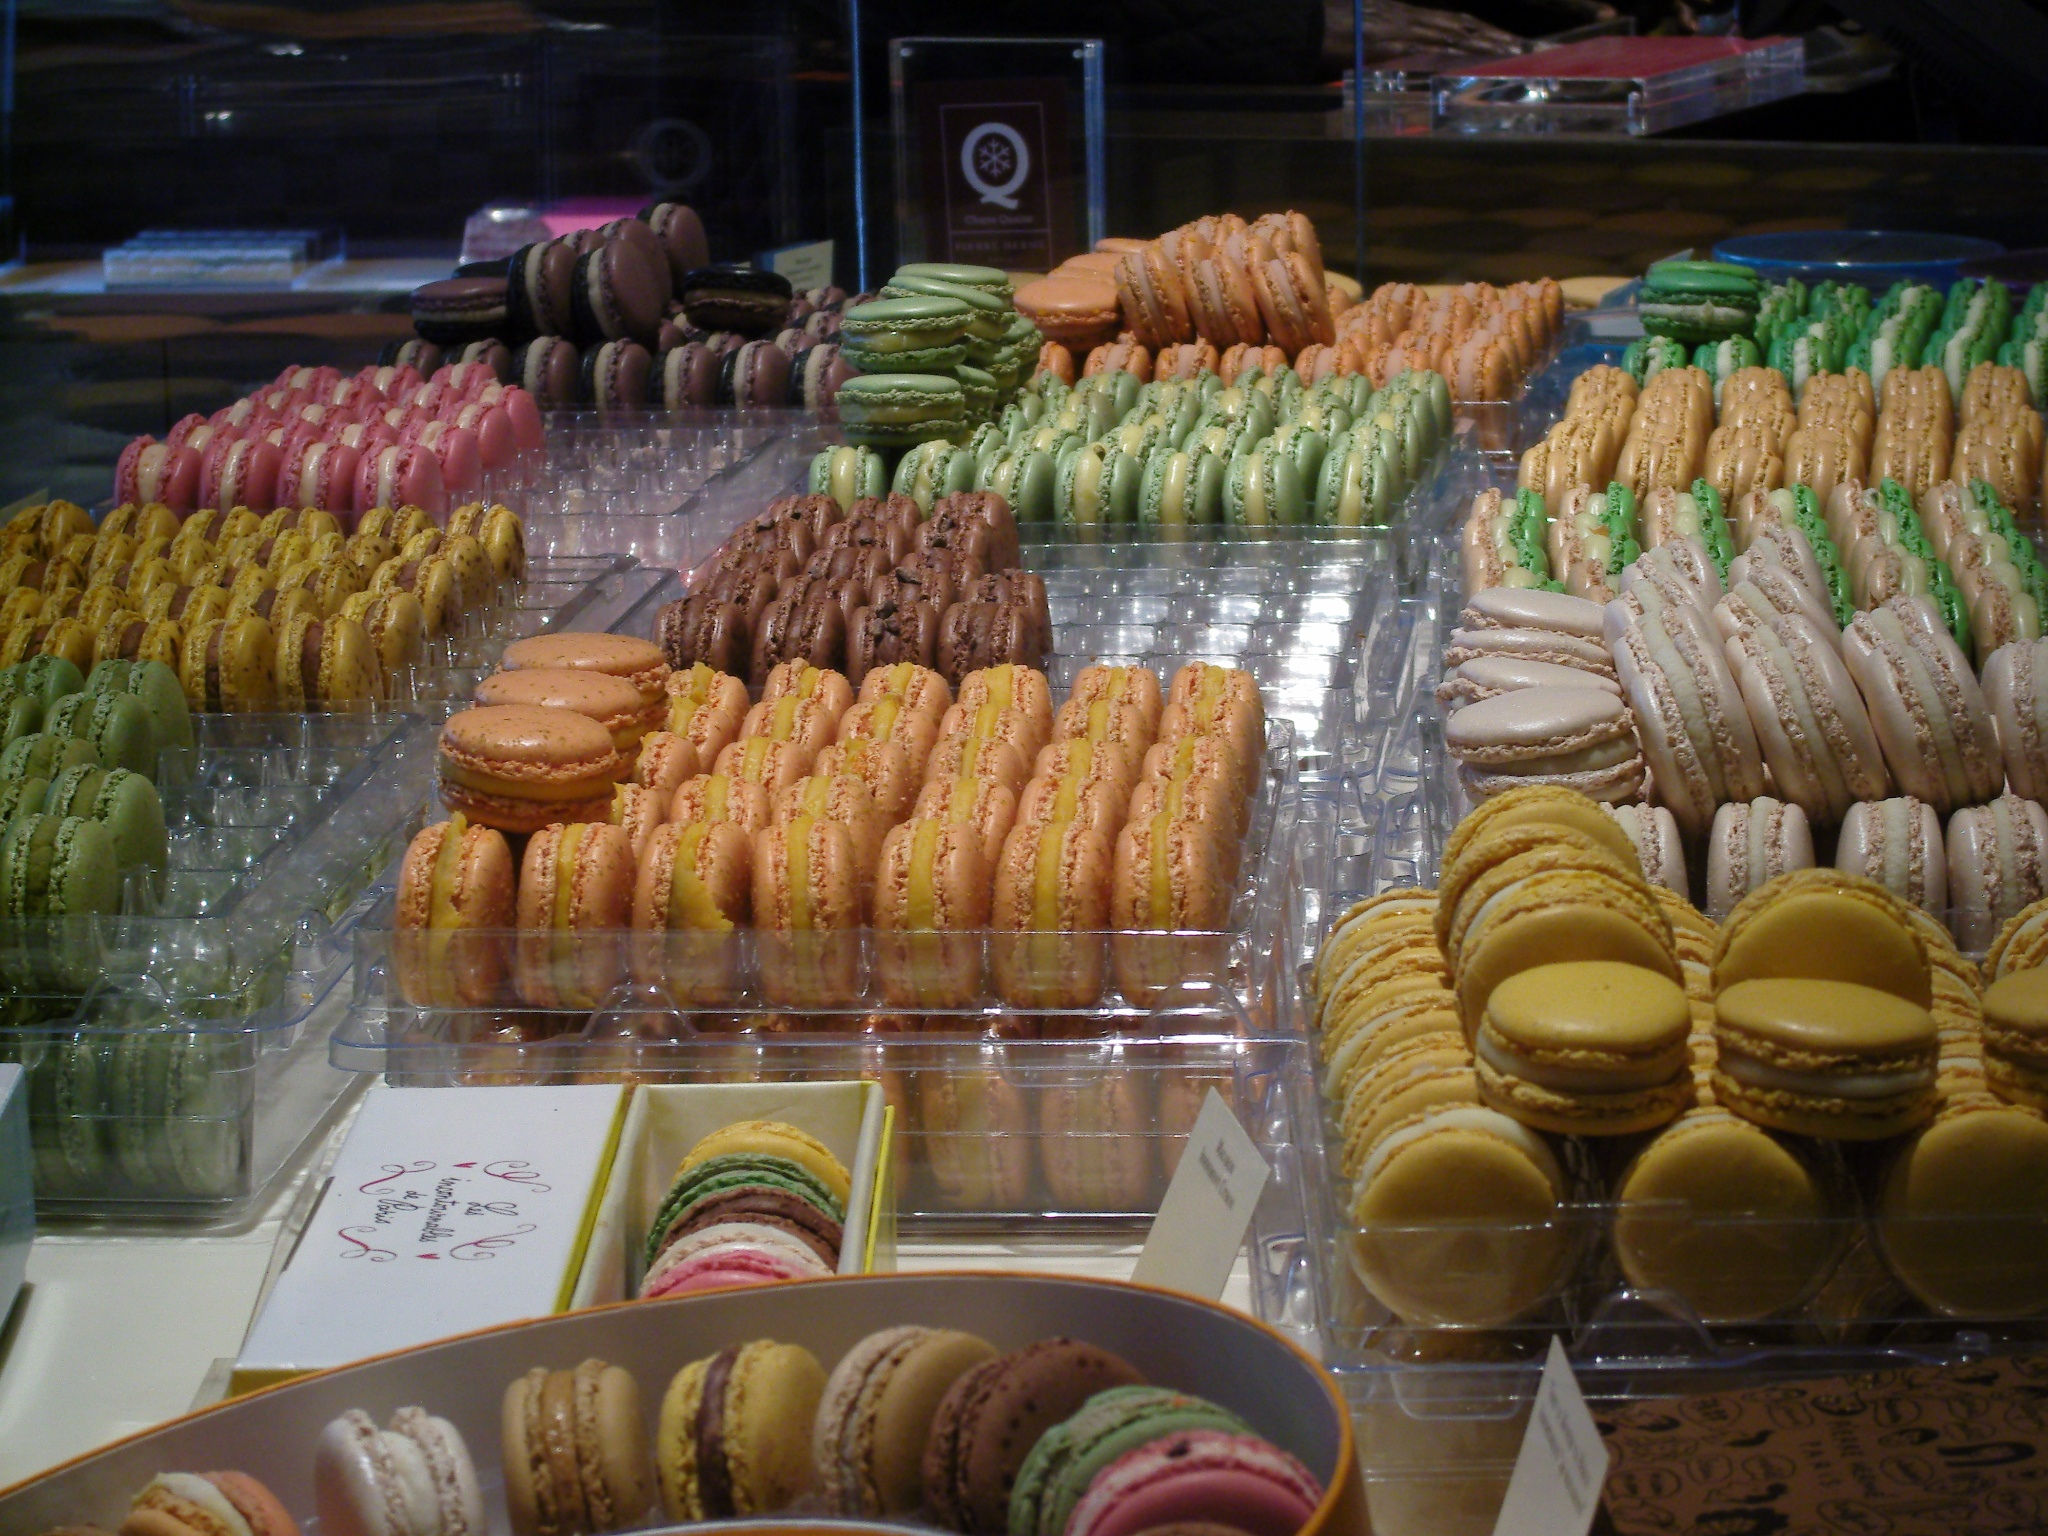 Macarons at Pierre Herme in Paris.Photo by alphacityguides.